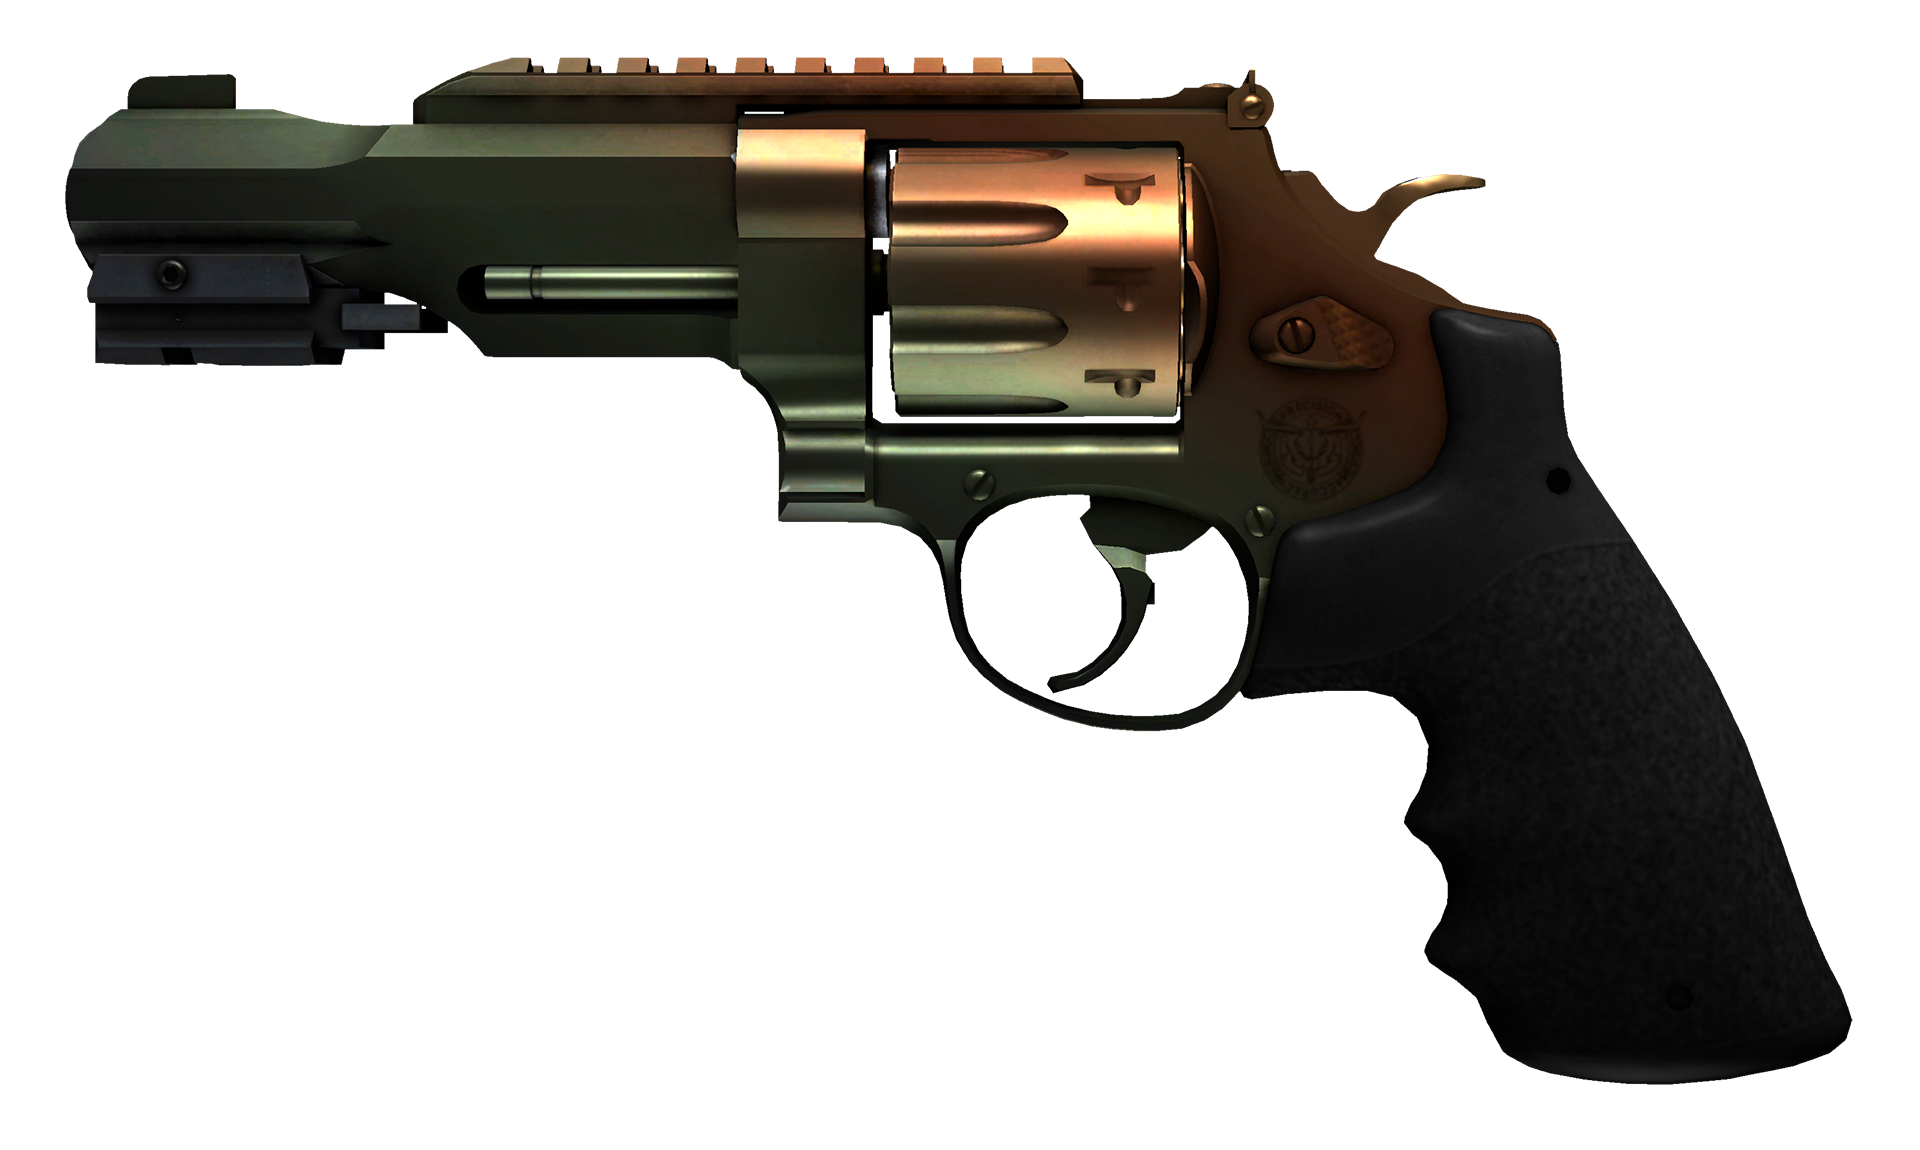 R8 Revolver Canal Spray cs go skin download the new version for iphone